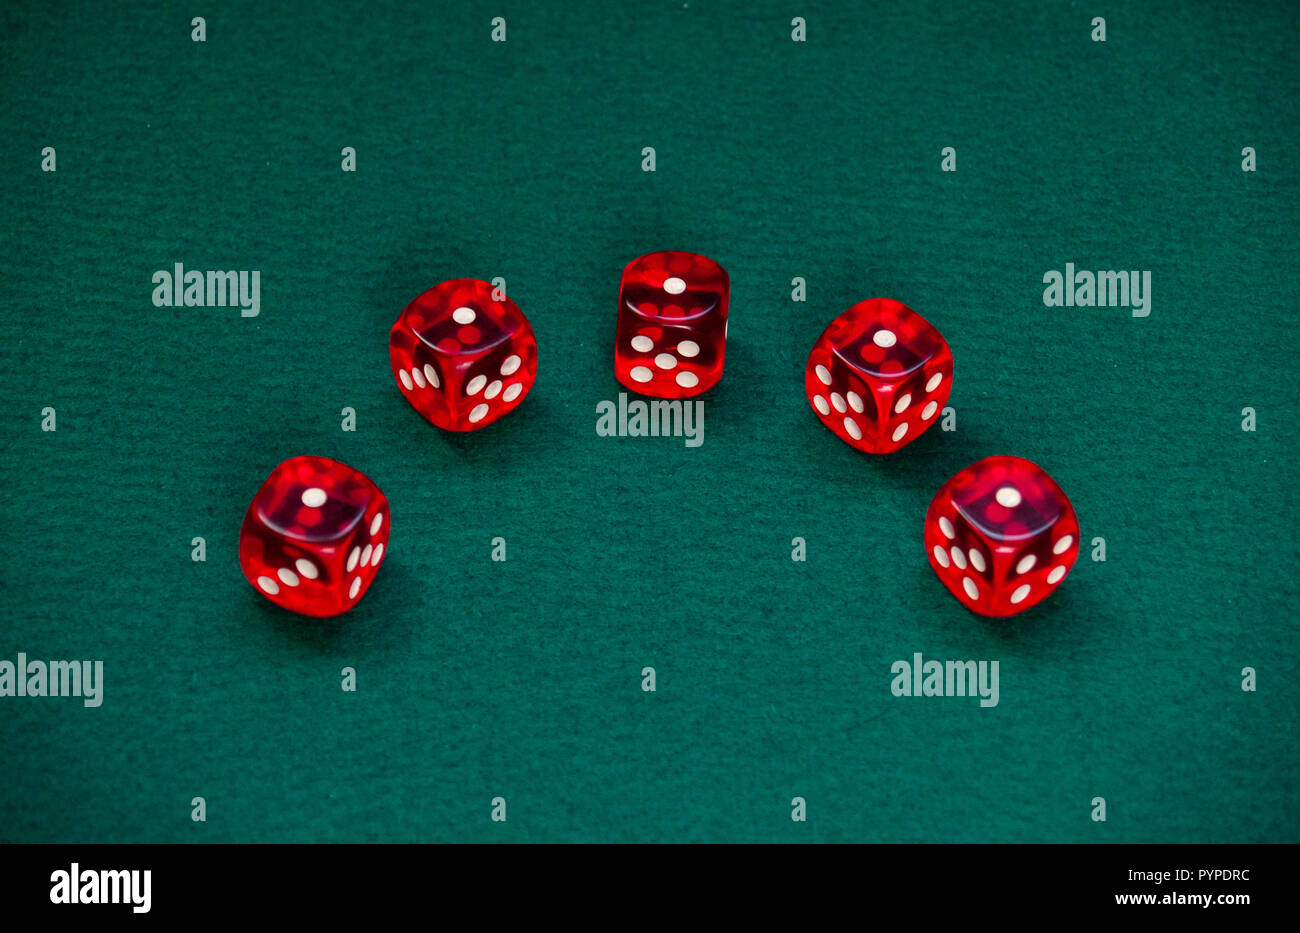 Several red dice with white dots on a green mat Stock Photo